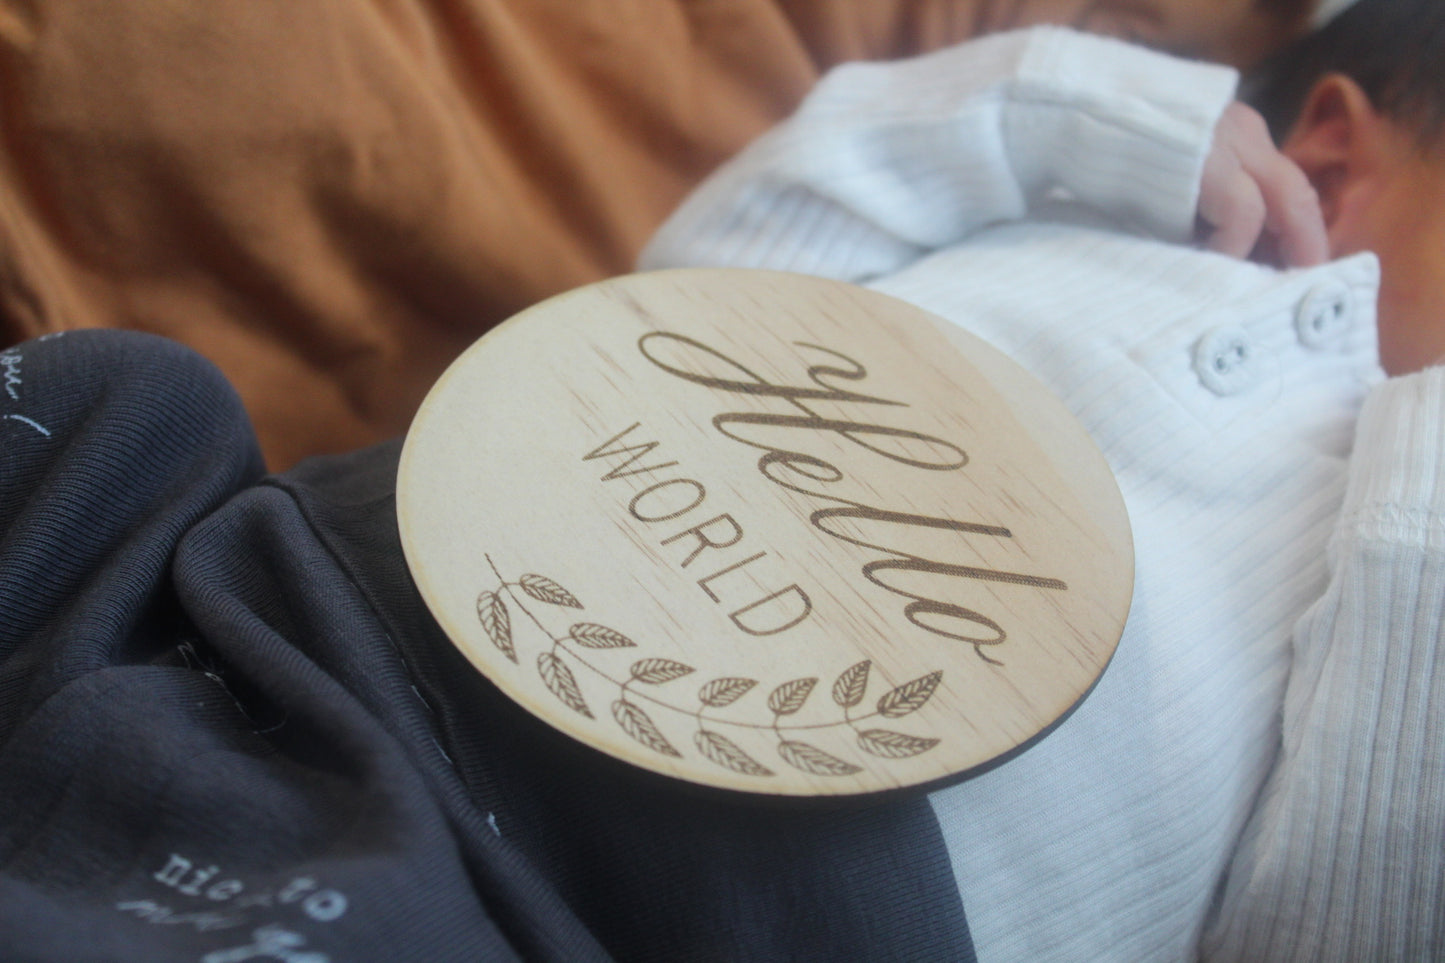 “Hello World, I’m here” raw wooden disc